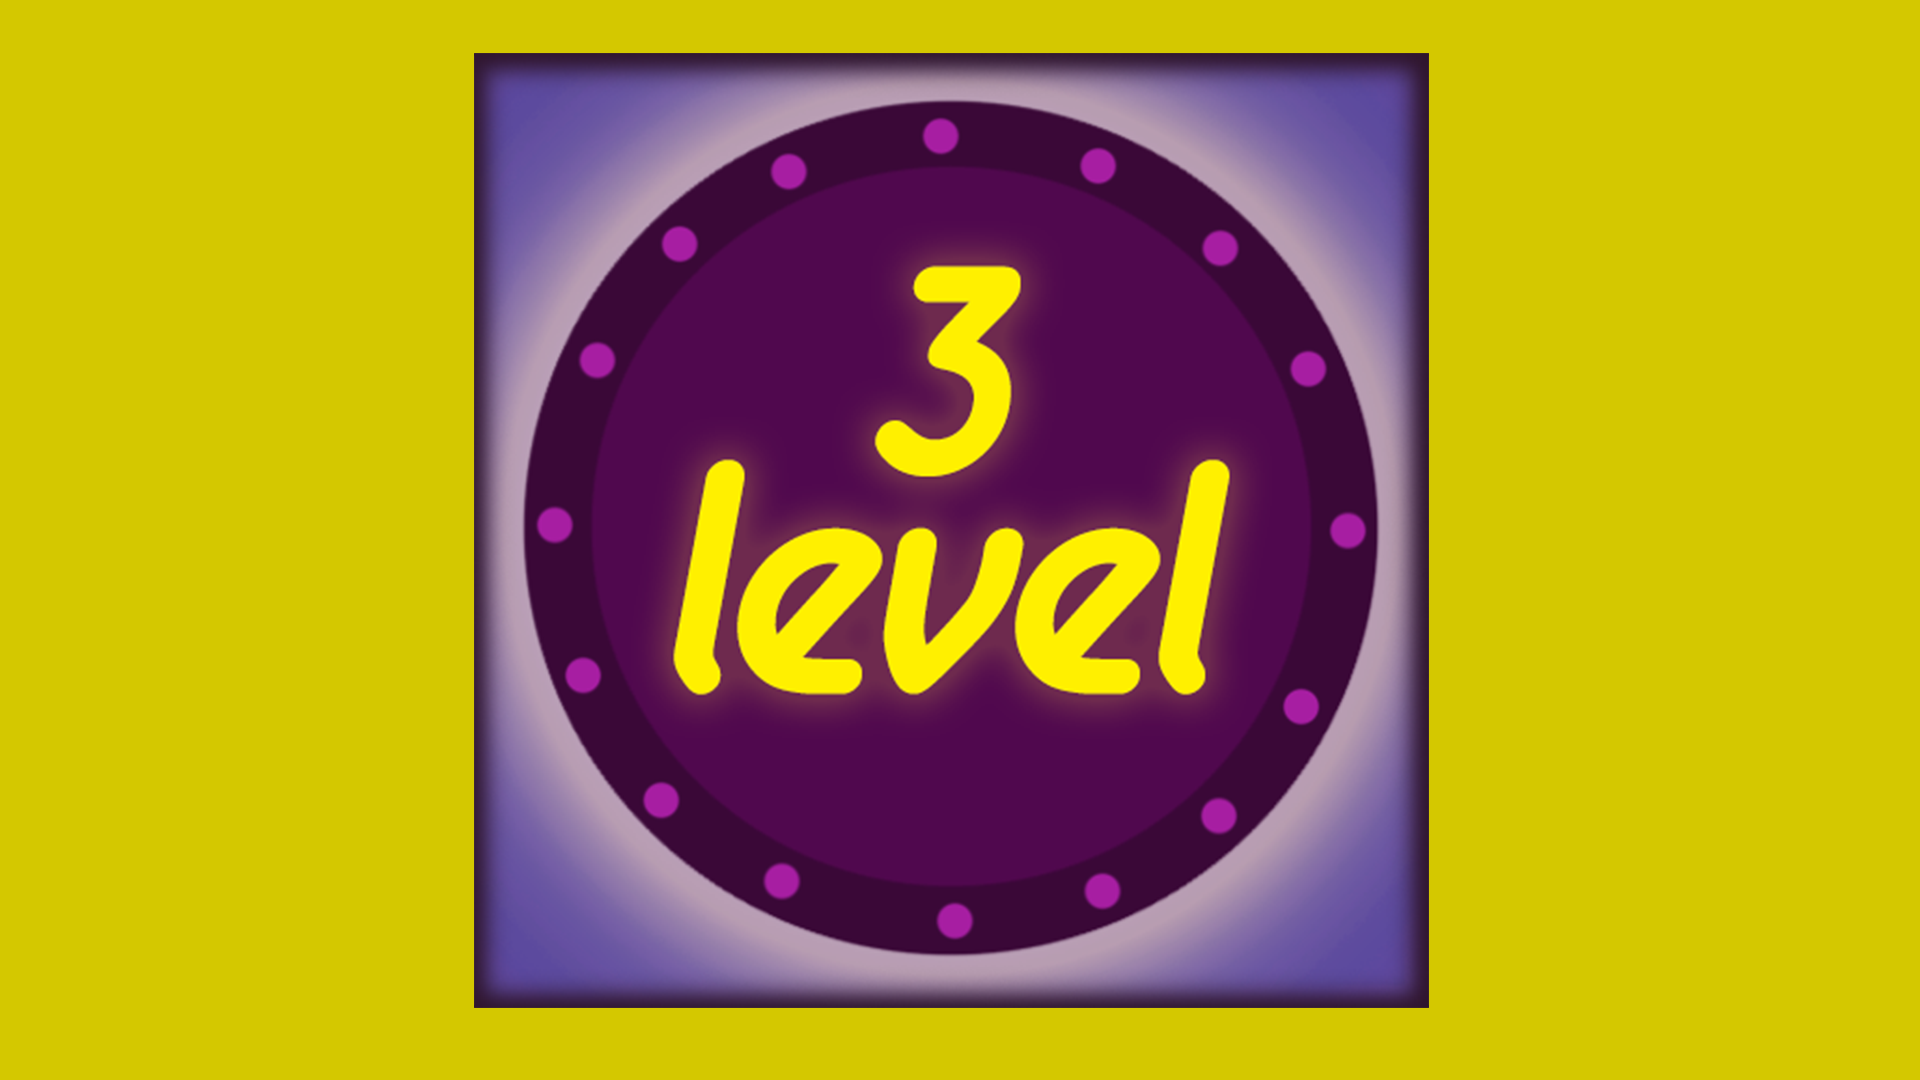 Icon for Level 3